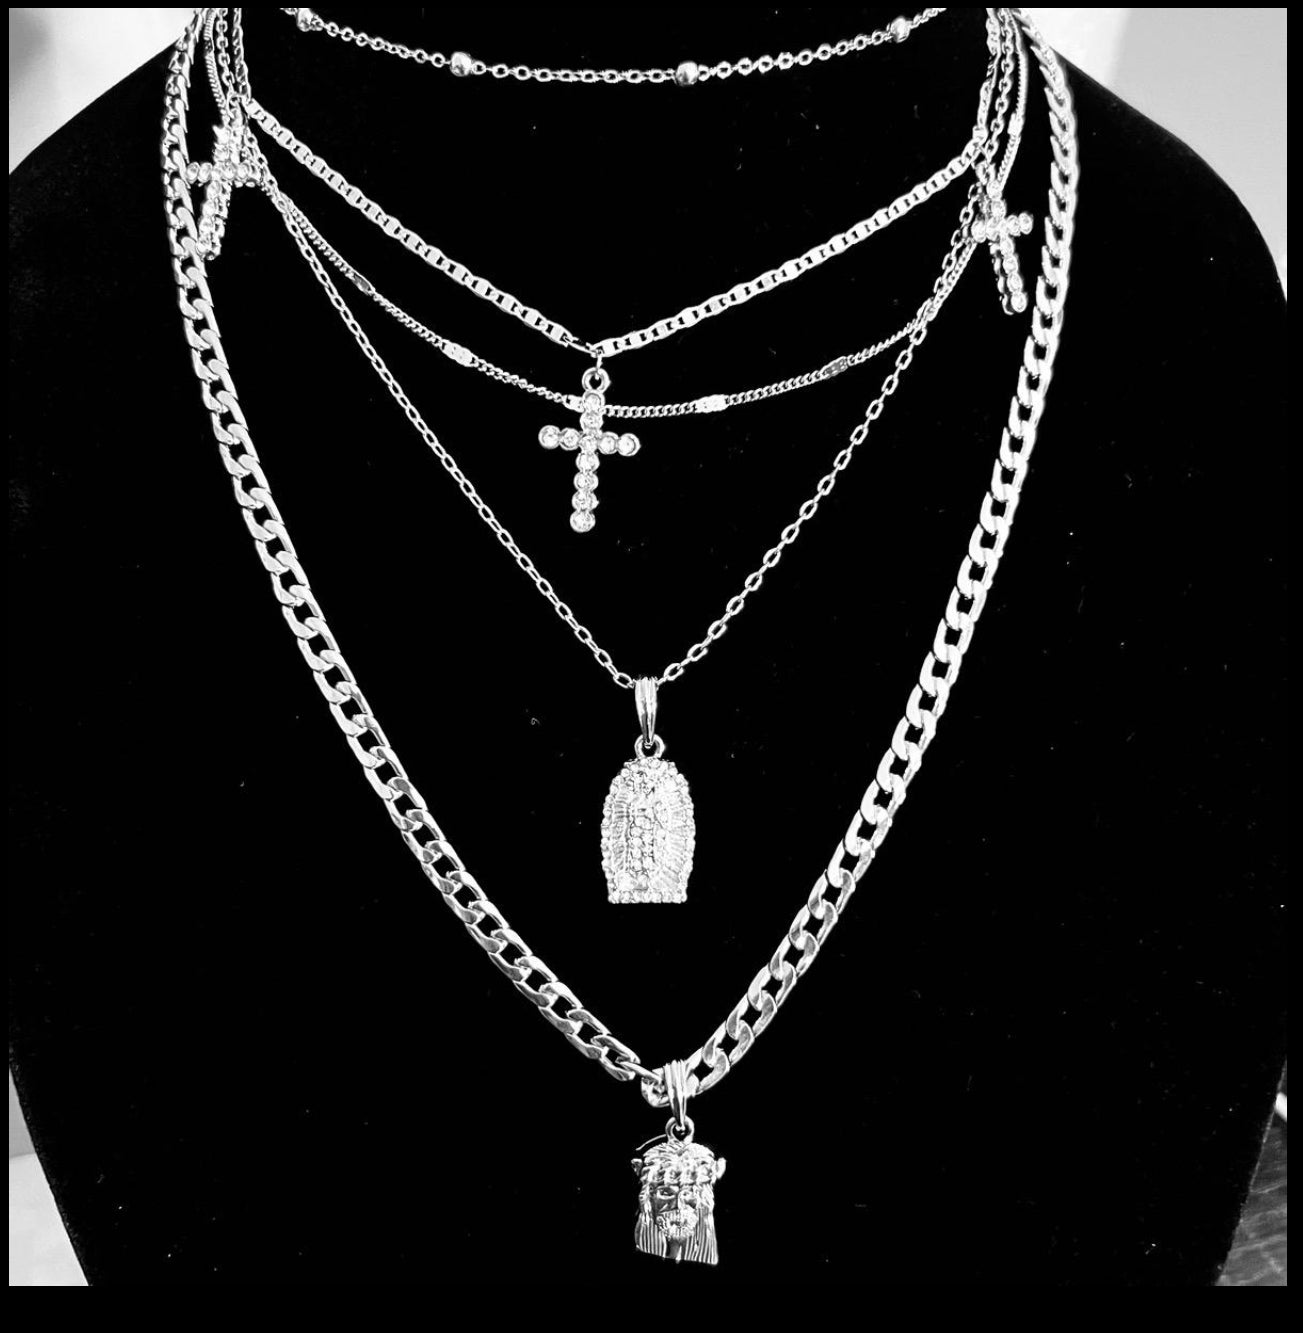 Layered religious necklace